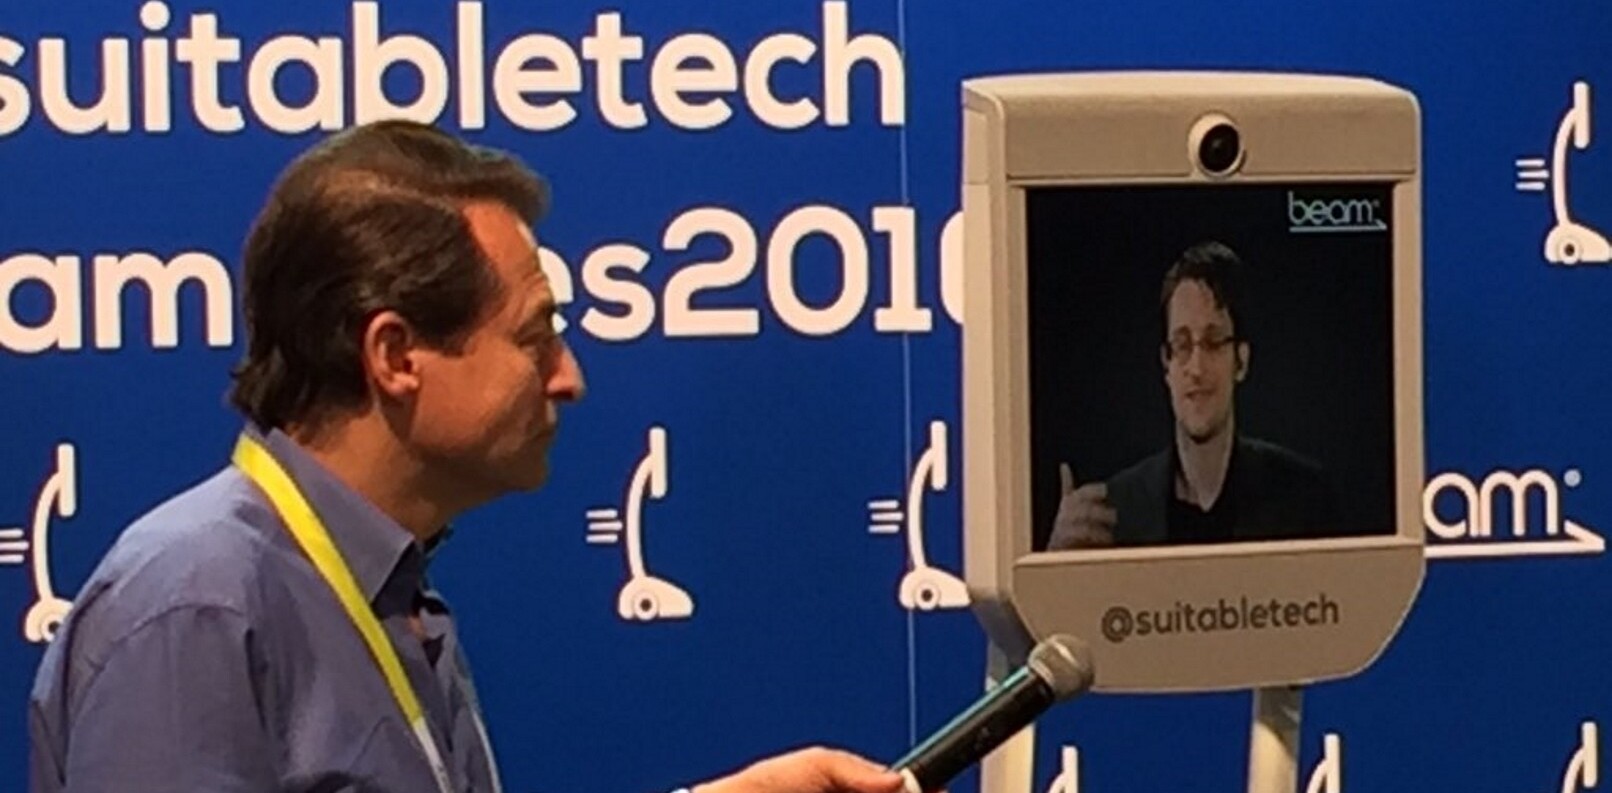 The closest the US has come to Edward Snowden is at CES 2016